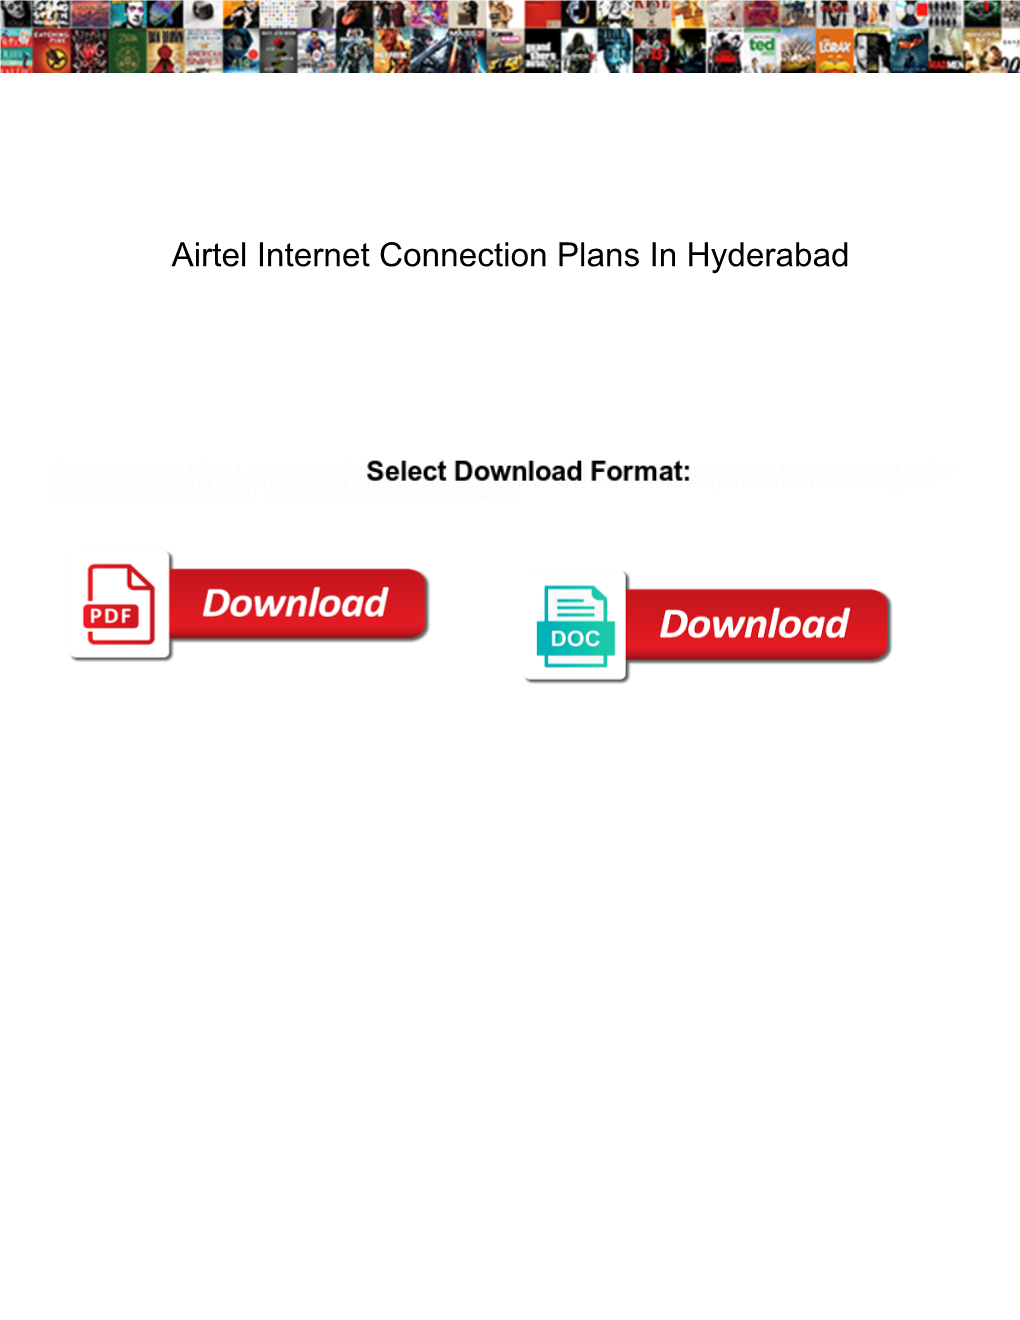 Airtel Internet Connection Plans in Hyderabad